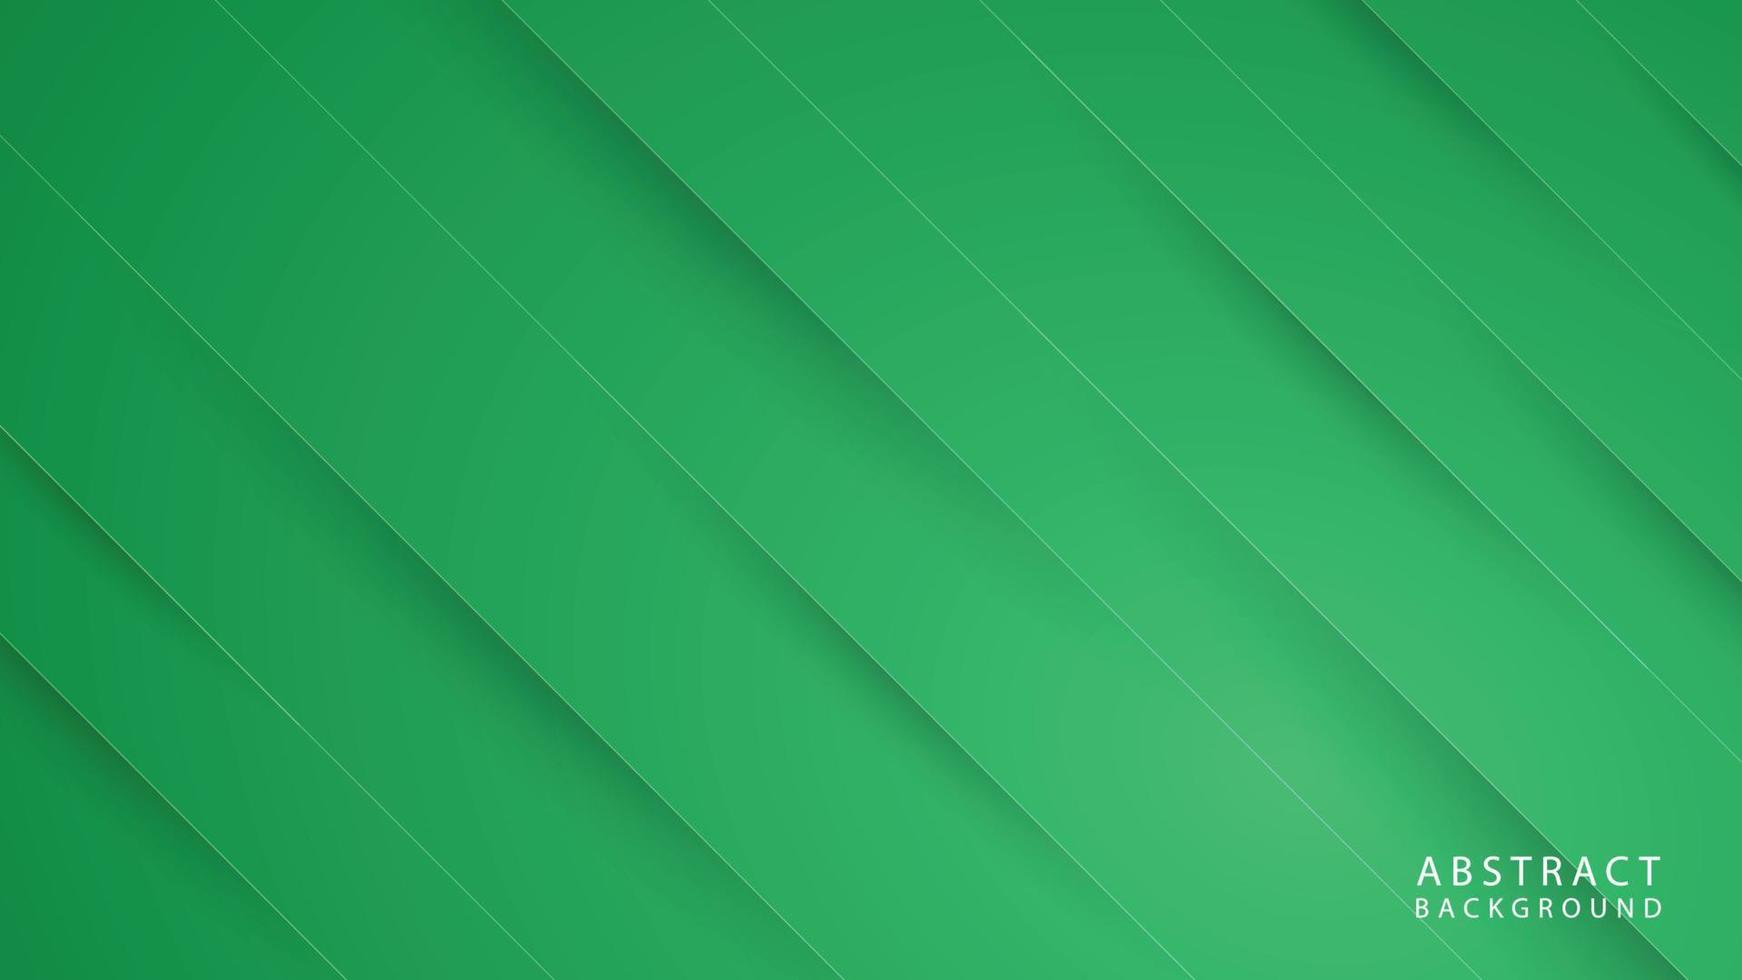 Abstract geometric line shapes on green background vector